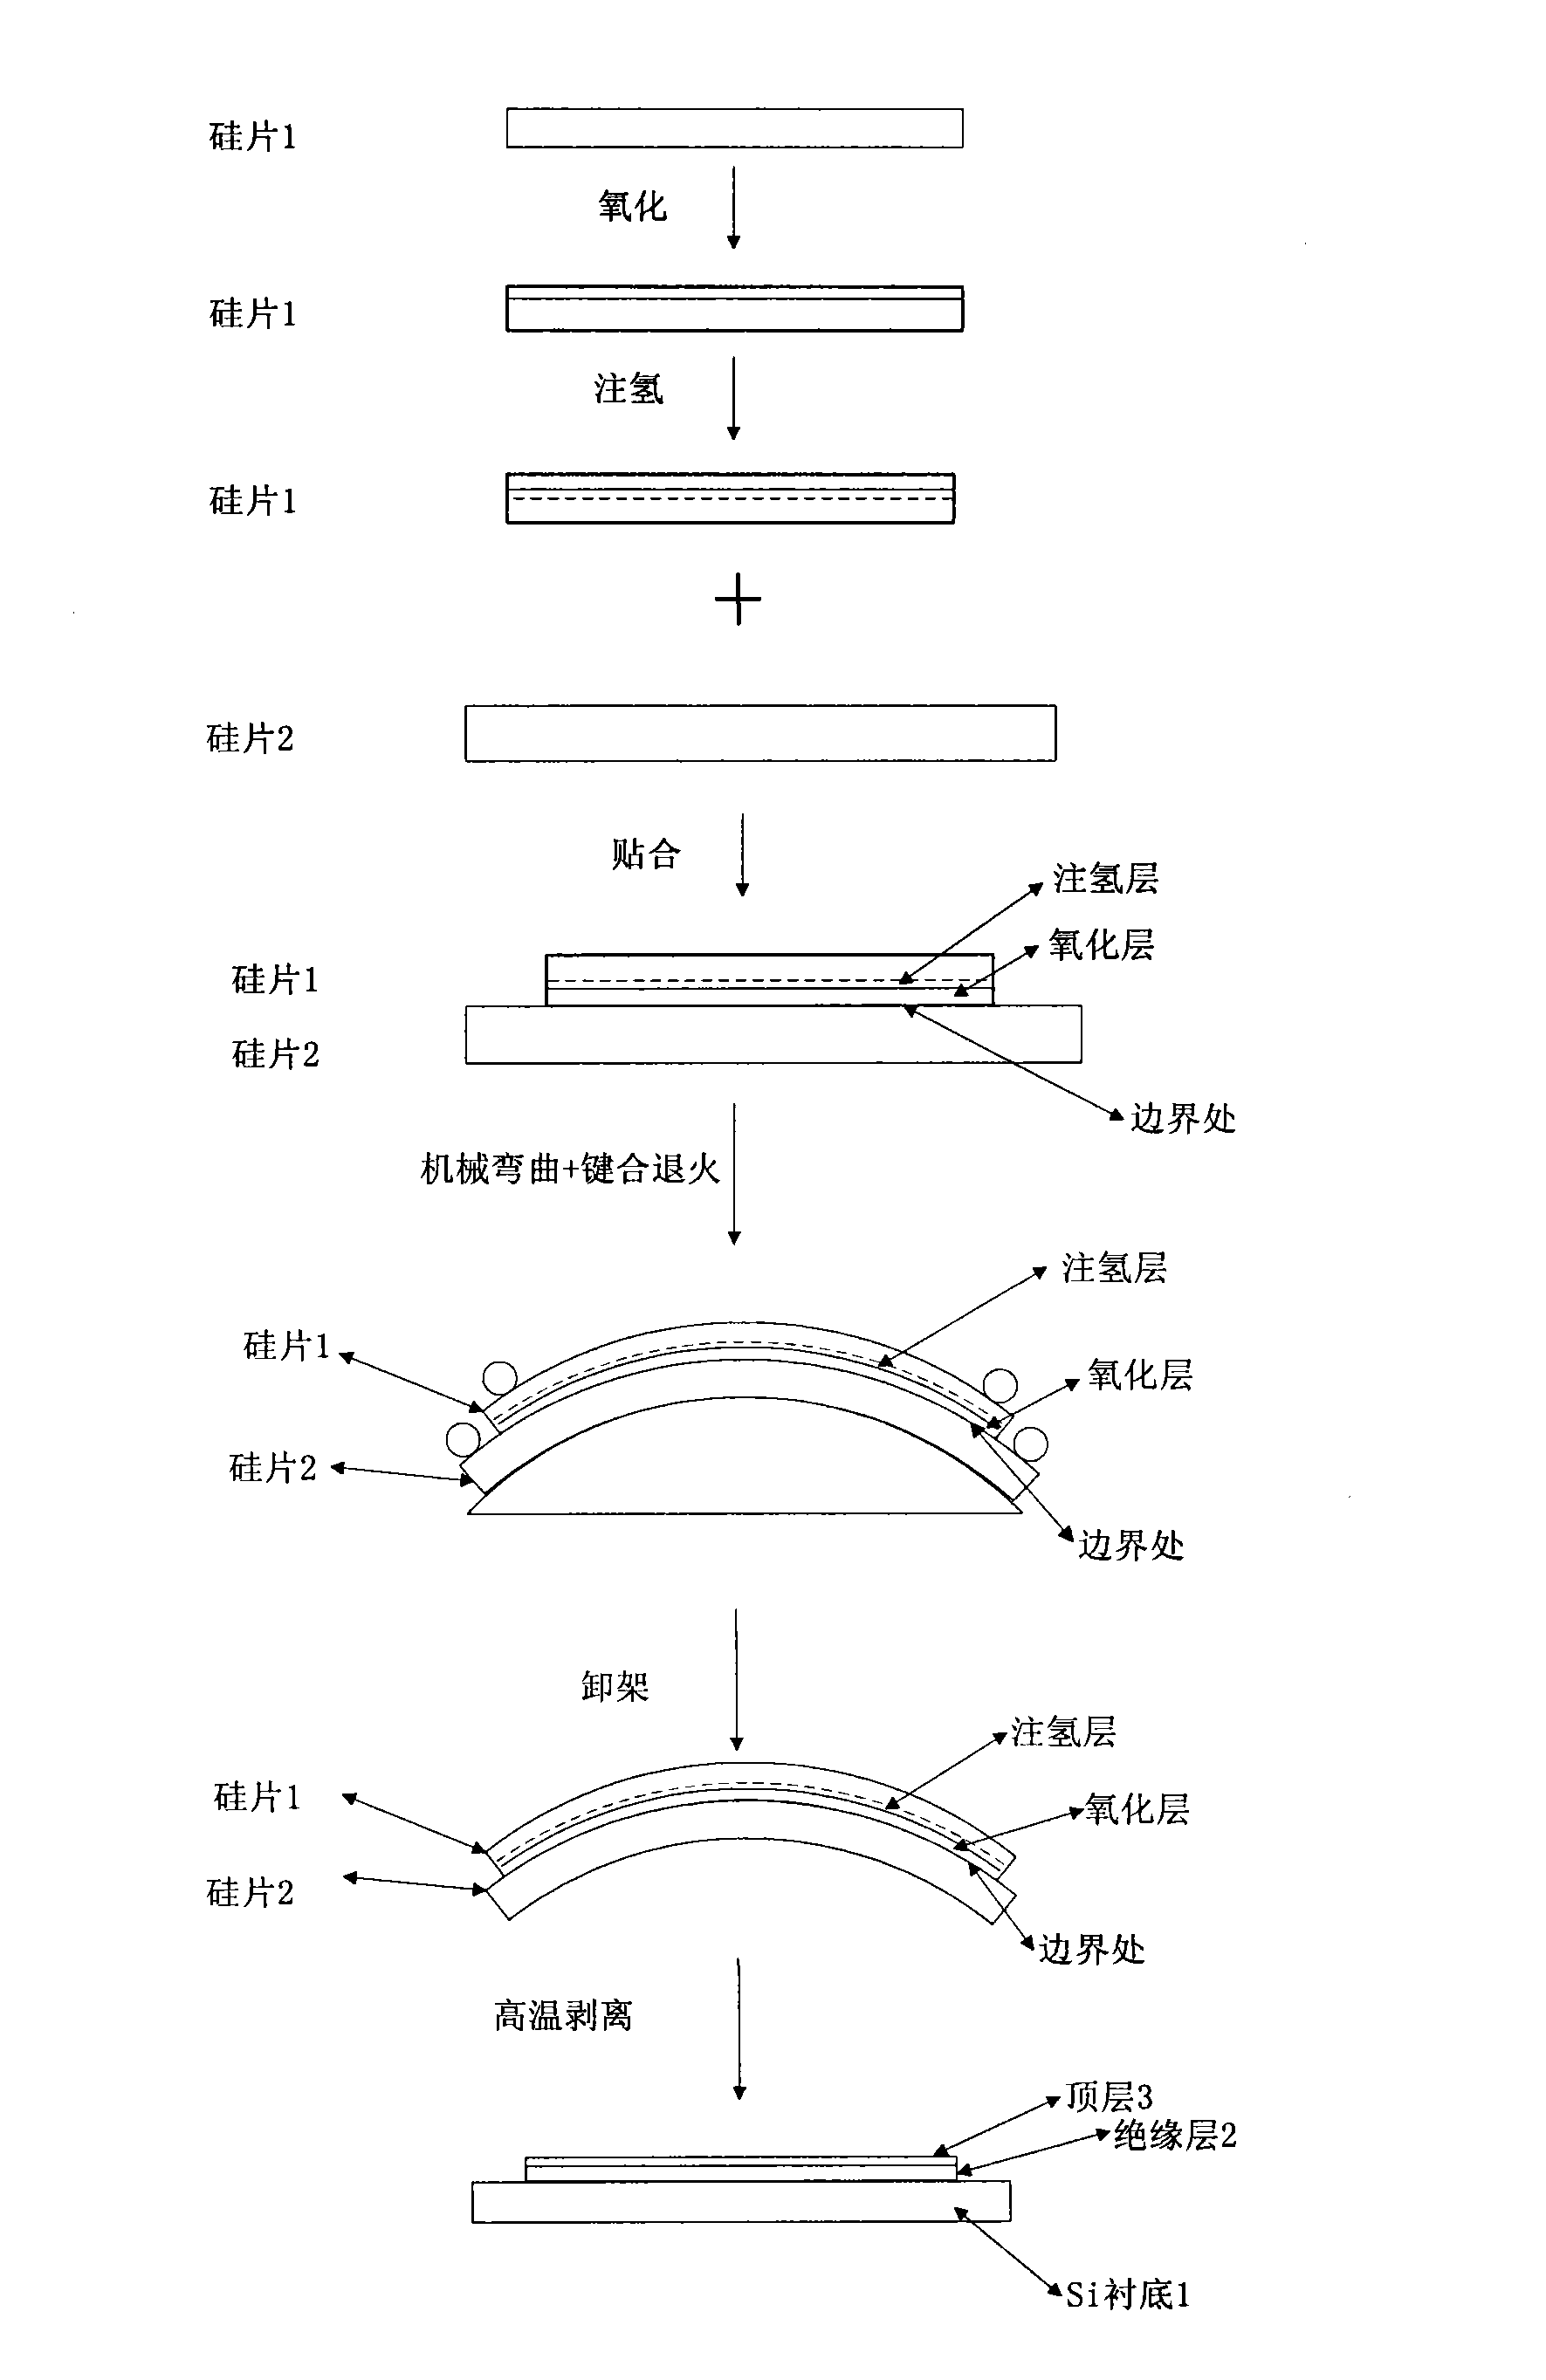 Manufacturing method of mechanical uniaxial strain GeOI (germanium-on-insulator) wafer based on SiN buried insulating layer